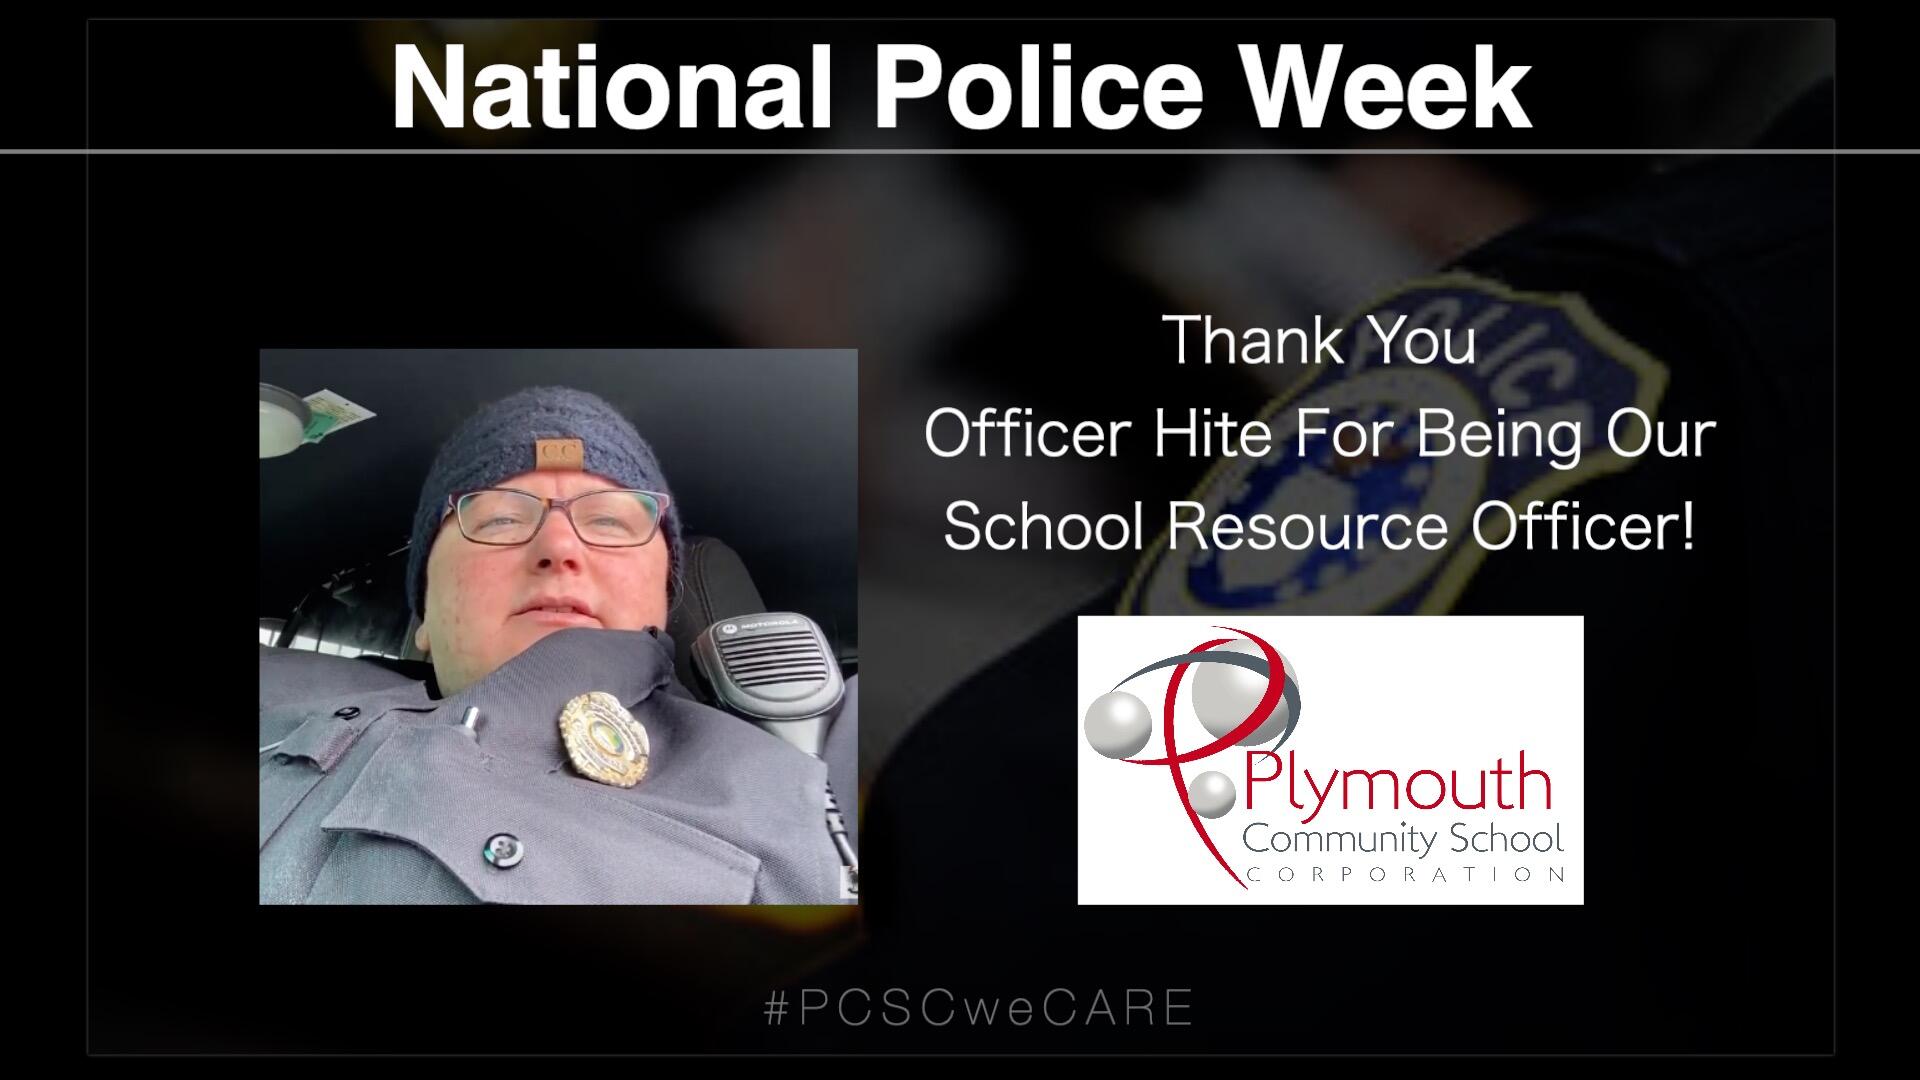 National Police Week- with PCSC logo-Thank you Office Hite for being our school resource officer!